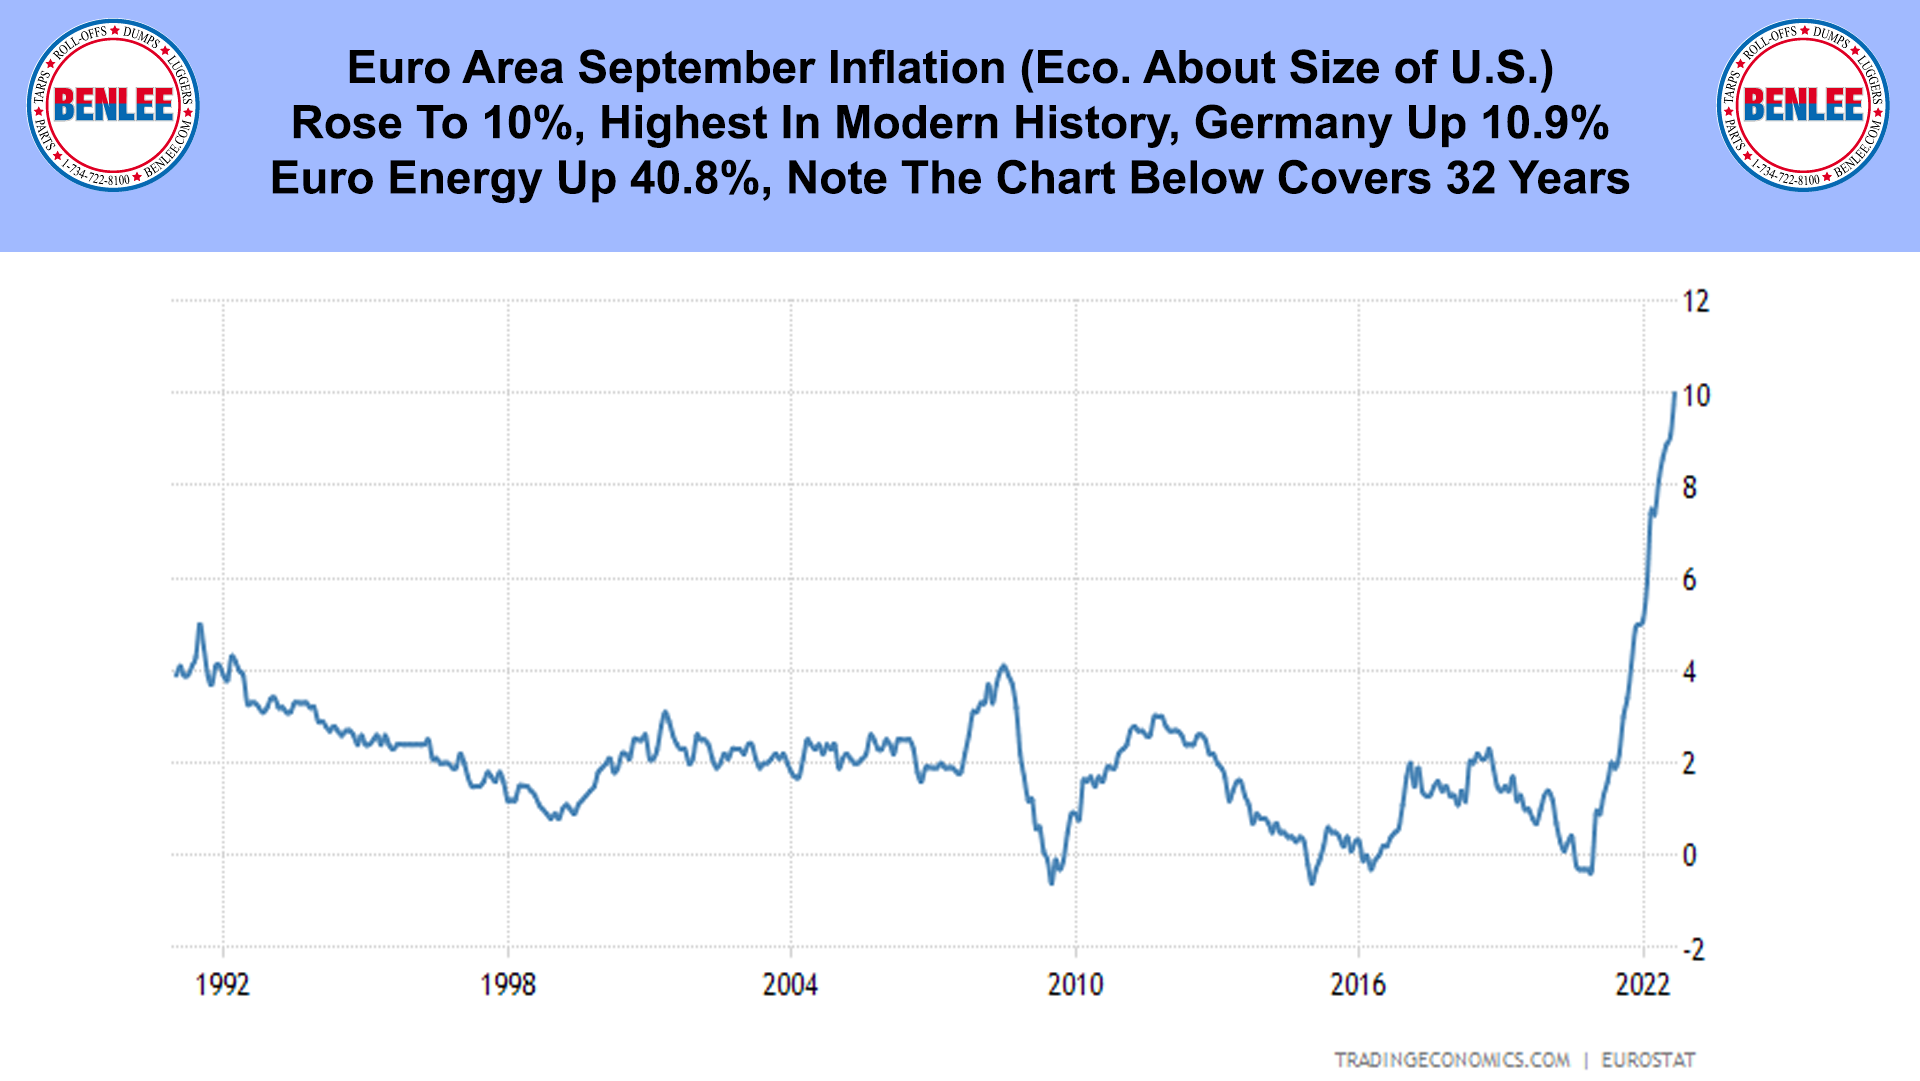 Euro Area September Inflation 